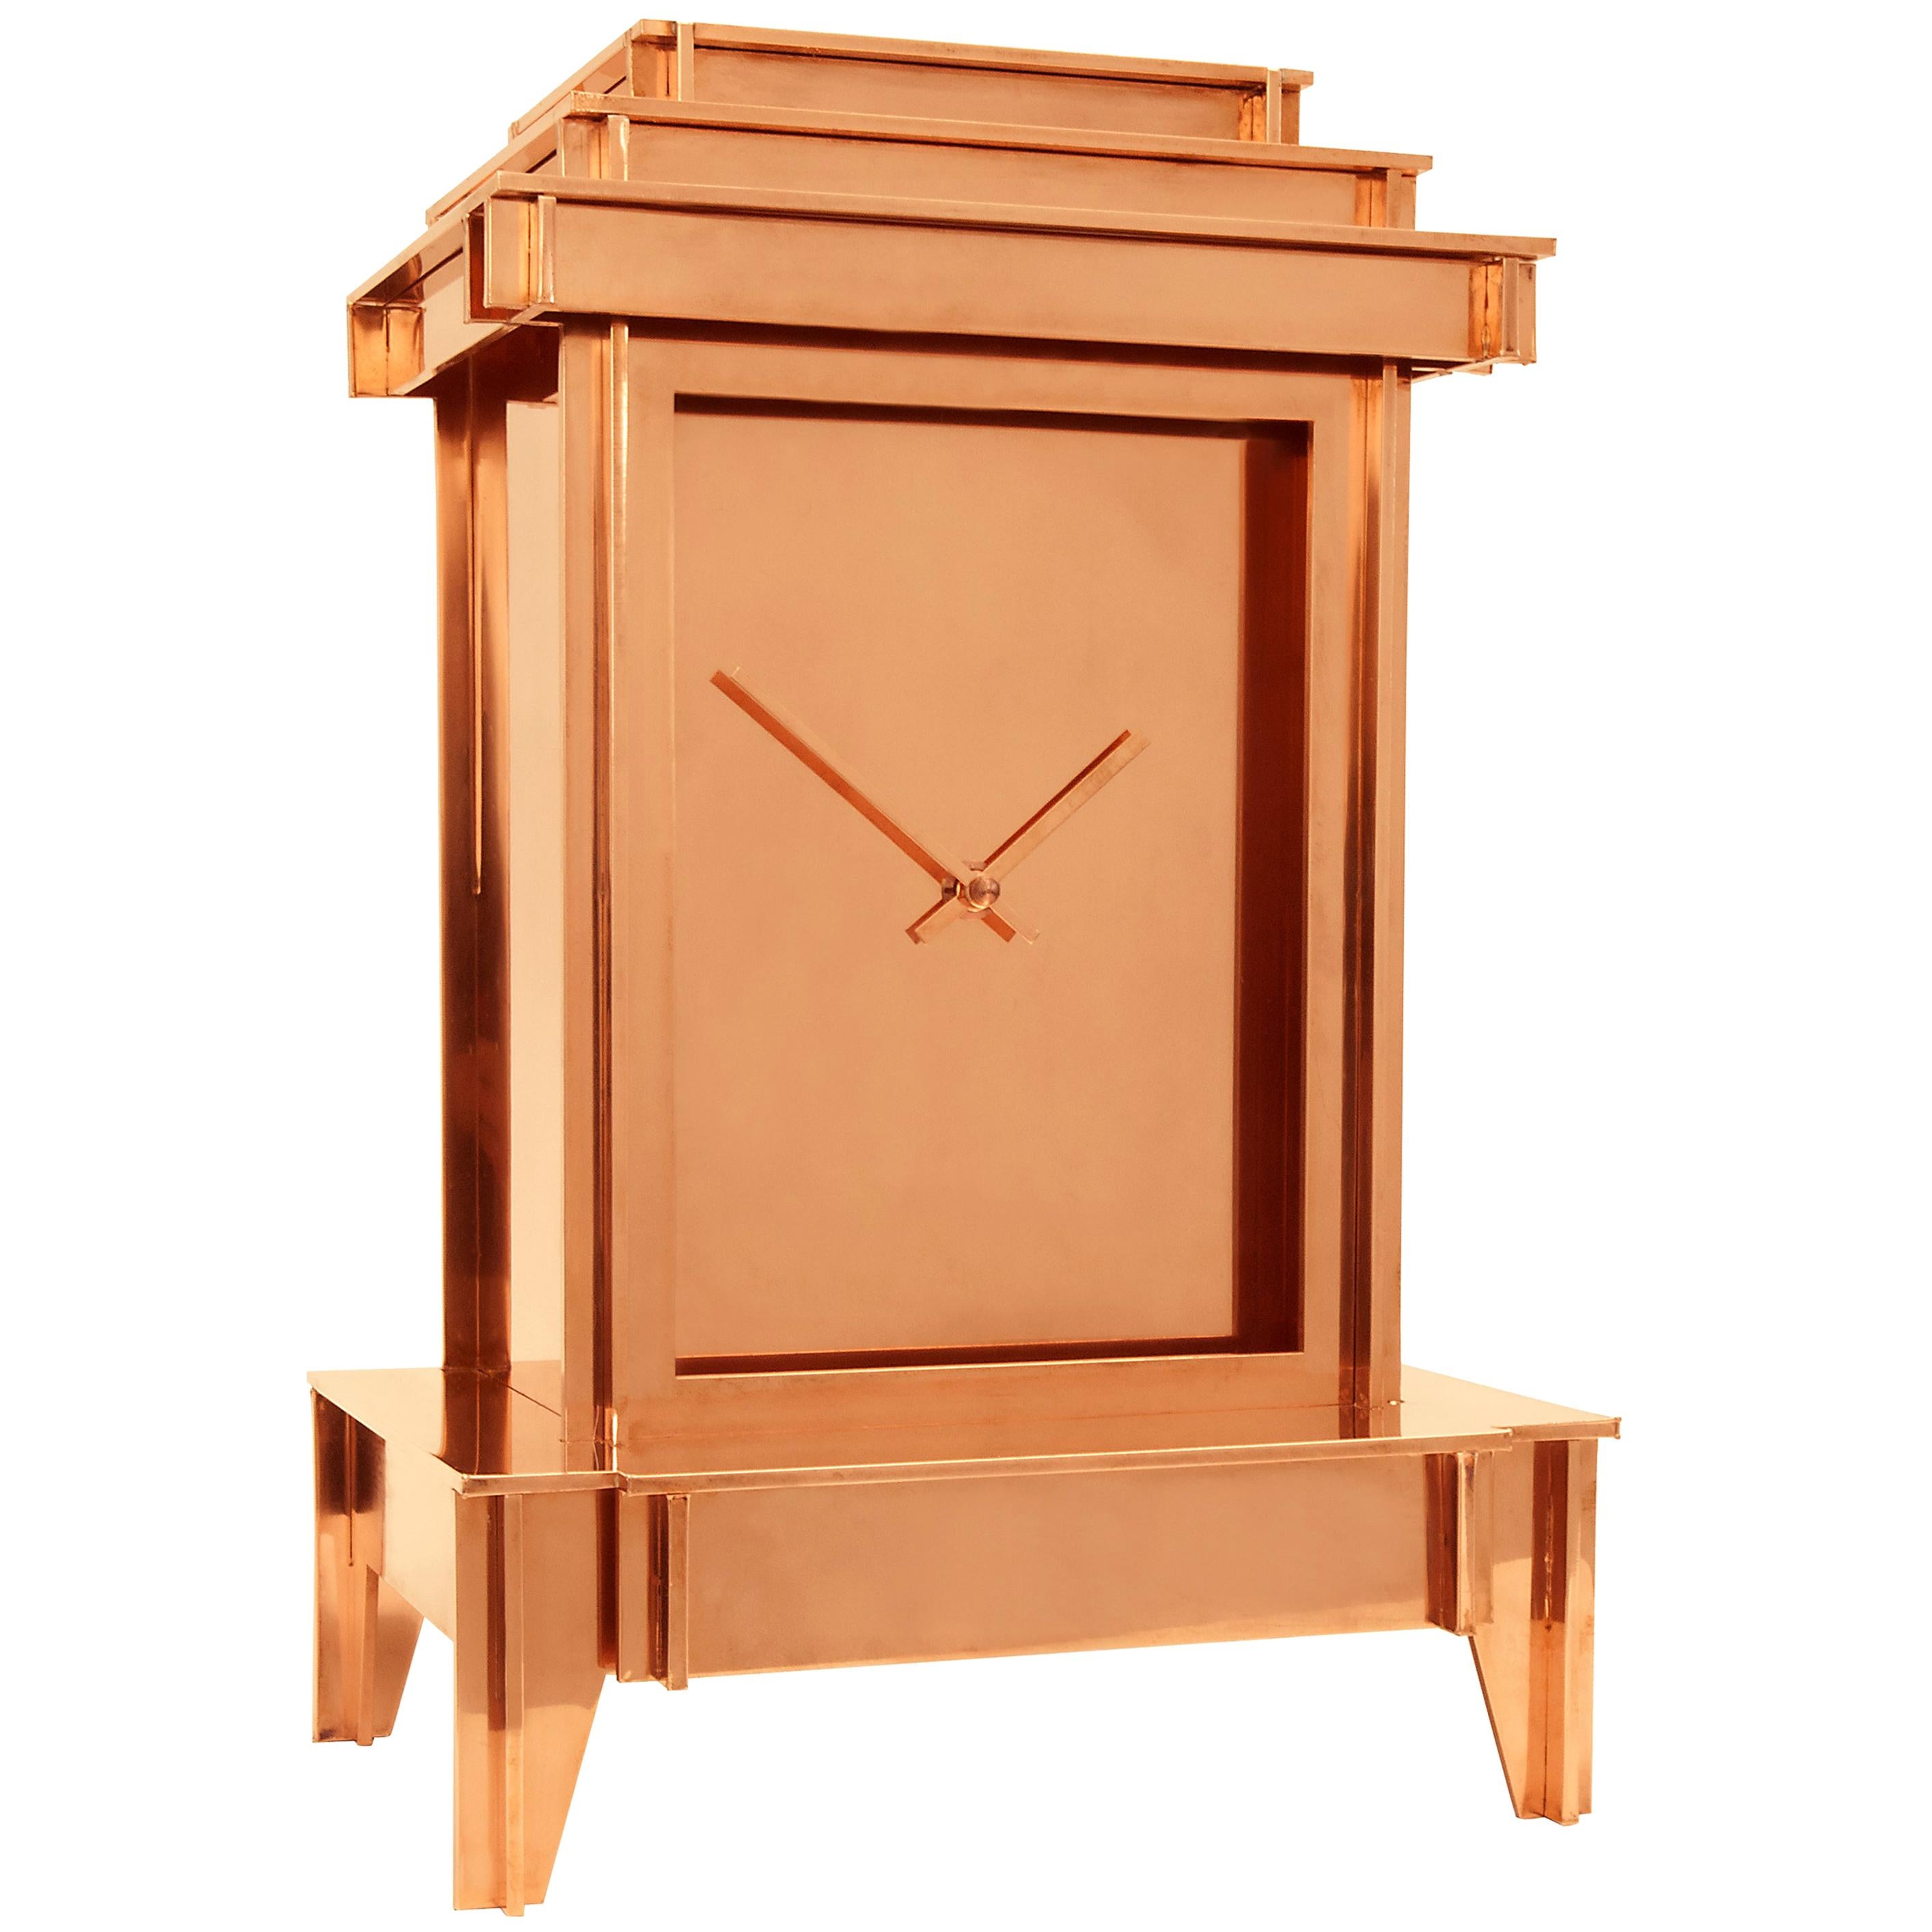 NSNG One More Time Clock Copper-Plated